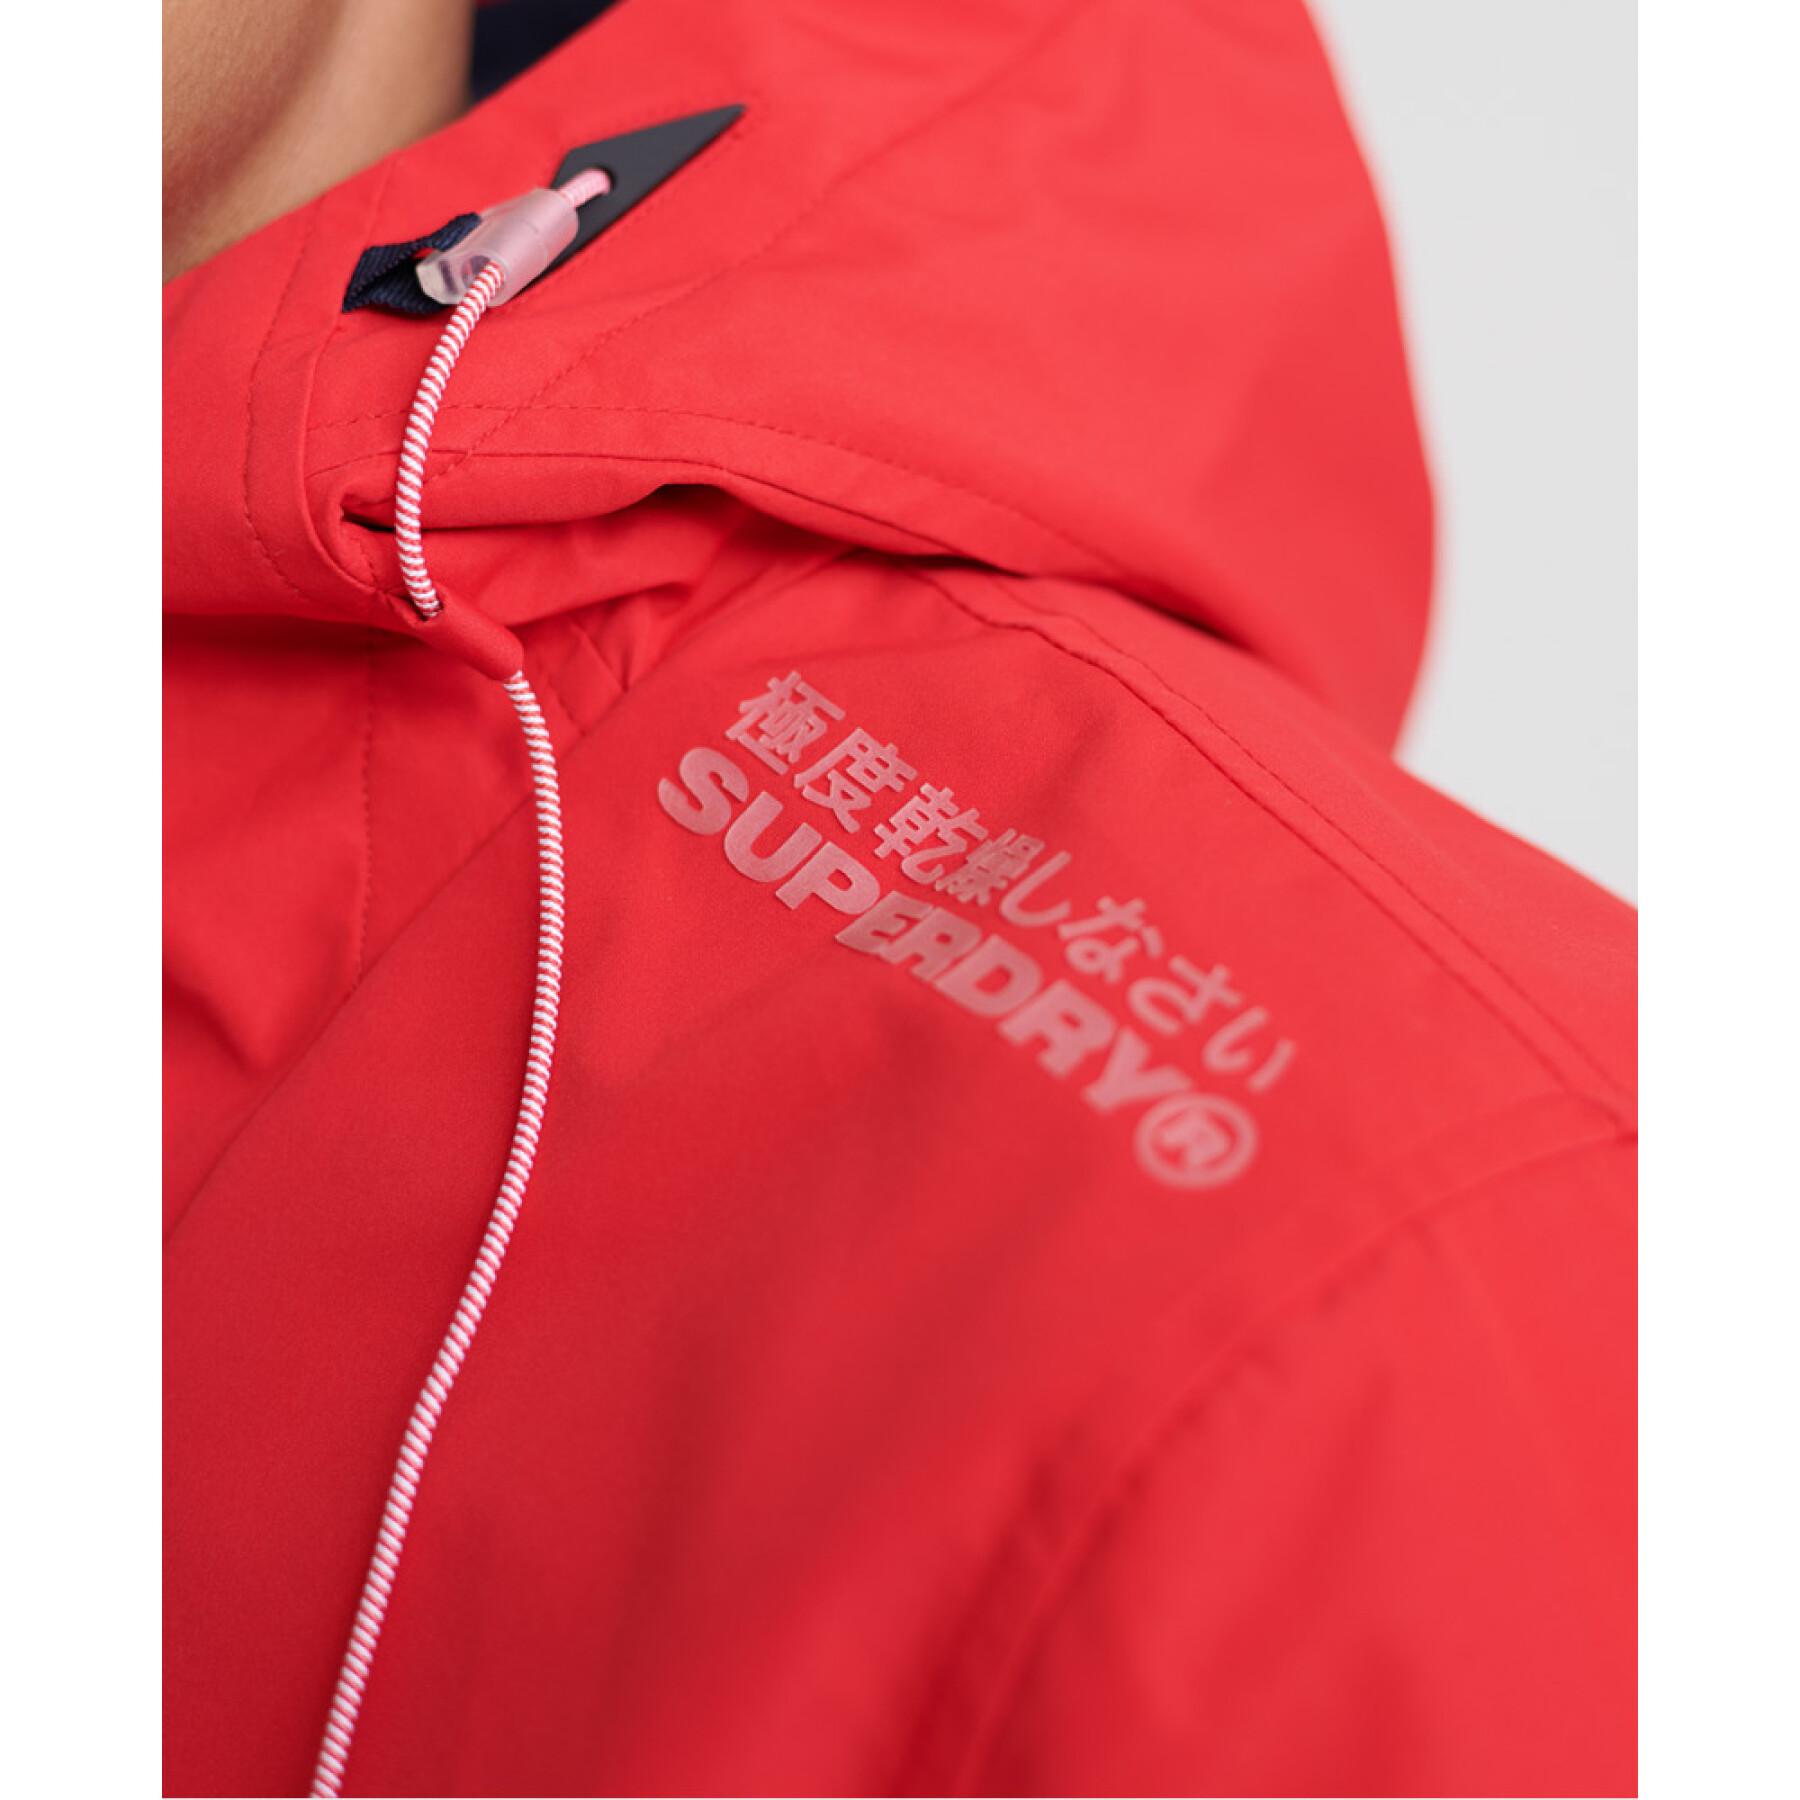 Giacca a vento Superdry Elite SD-Windcheater